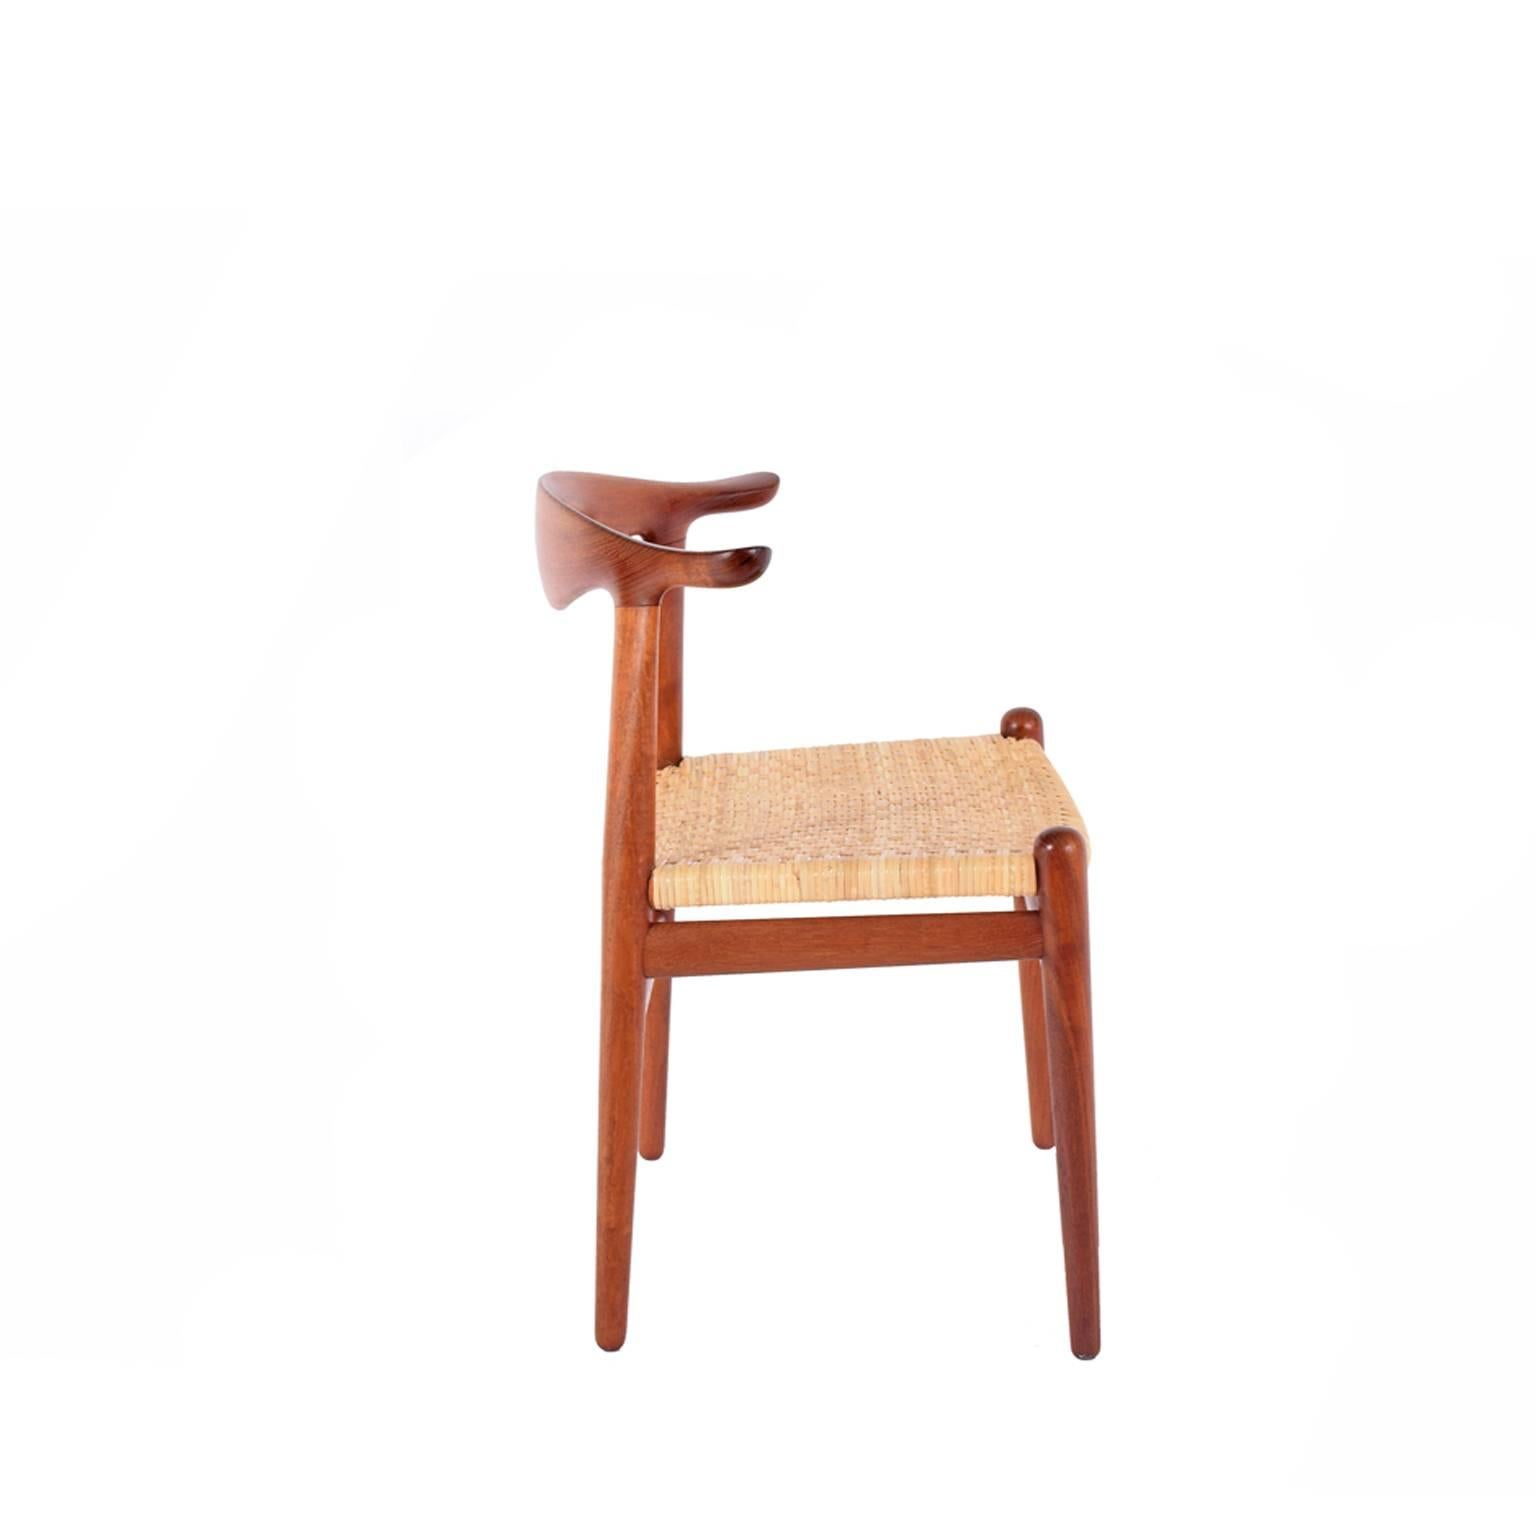 Original production Johannes Hansen solid teak cow horn chair with rosewood inlay back and cane seat. Retains labels from cabinet maker.